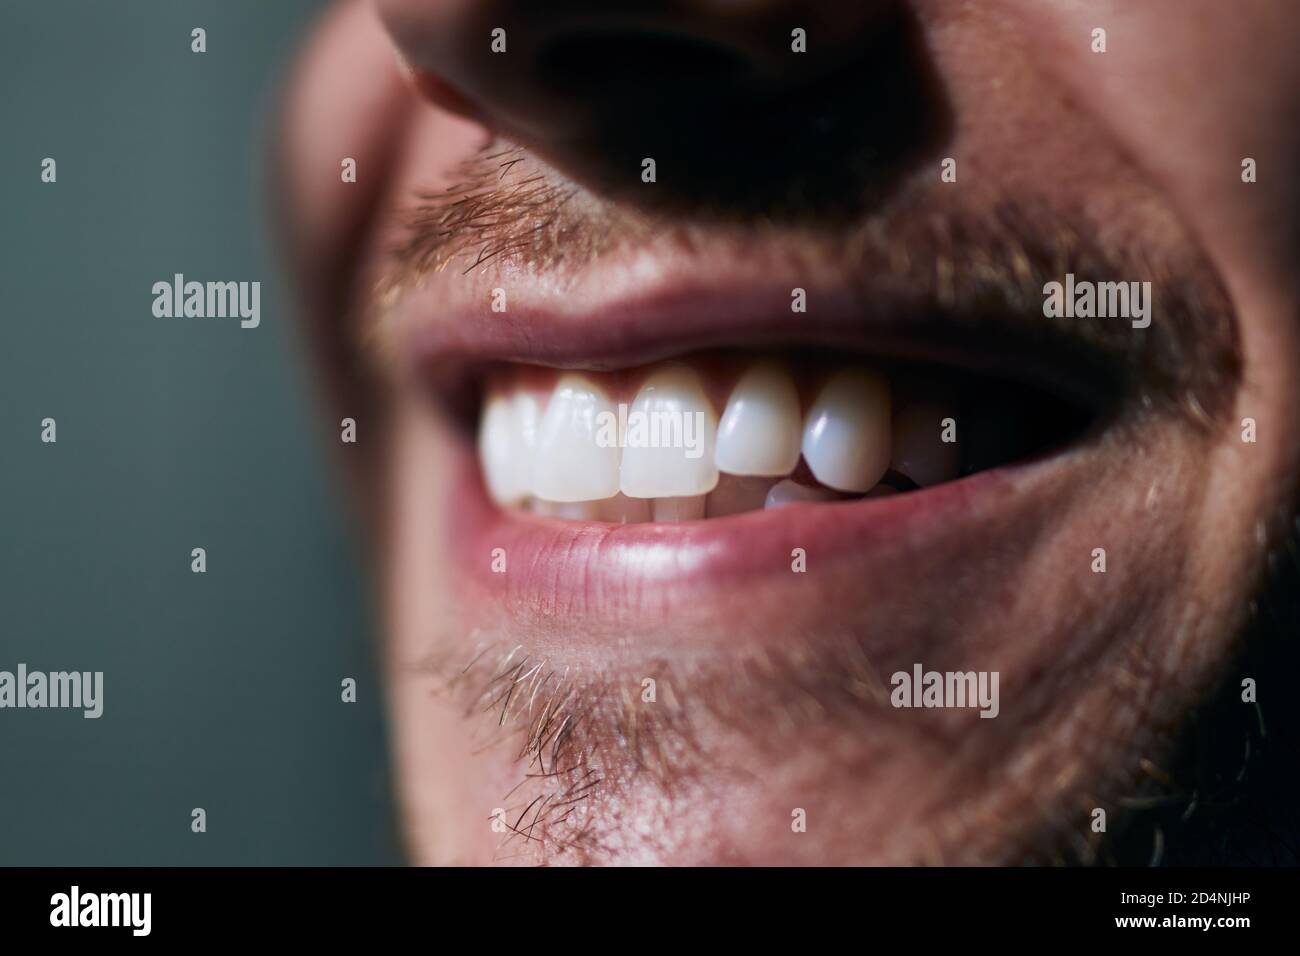 Toothy smile of young man. Close-up view of white teeth. Stock Photo